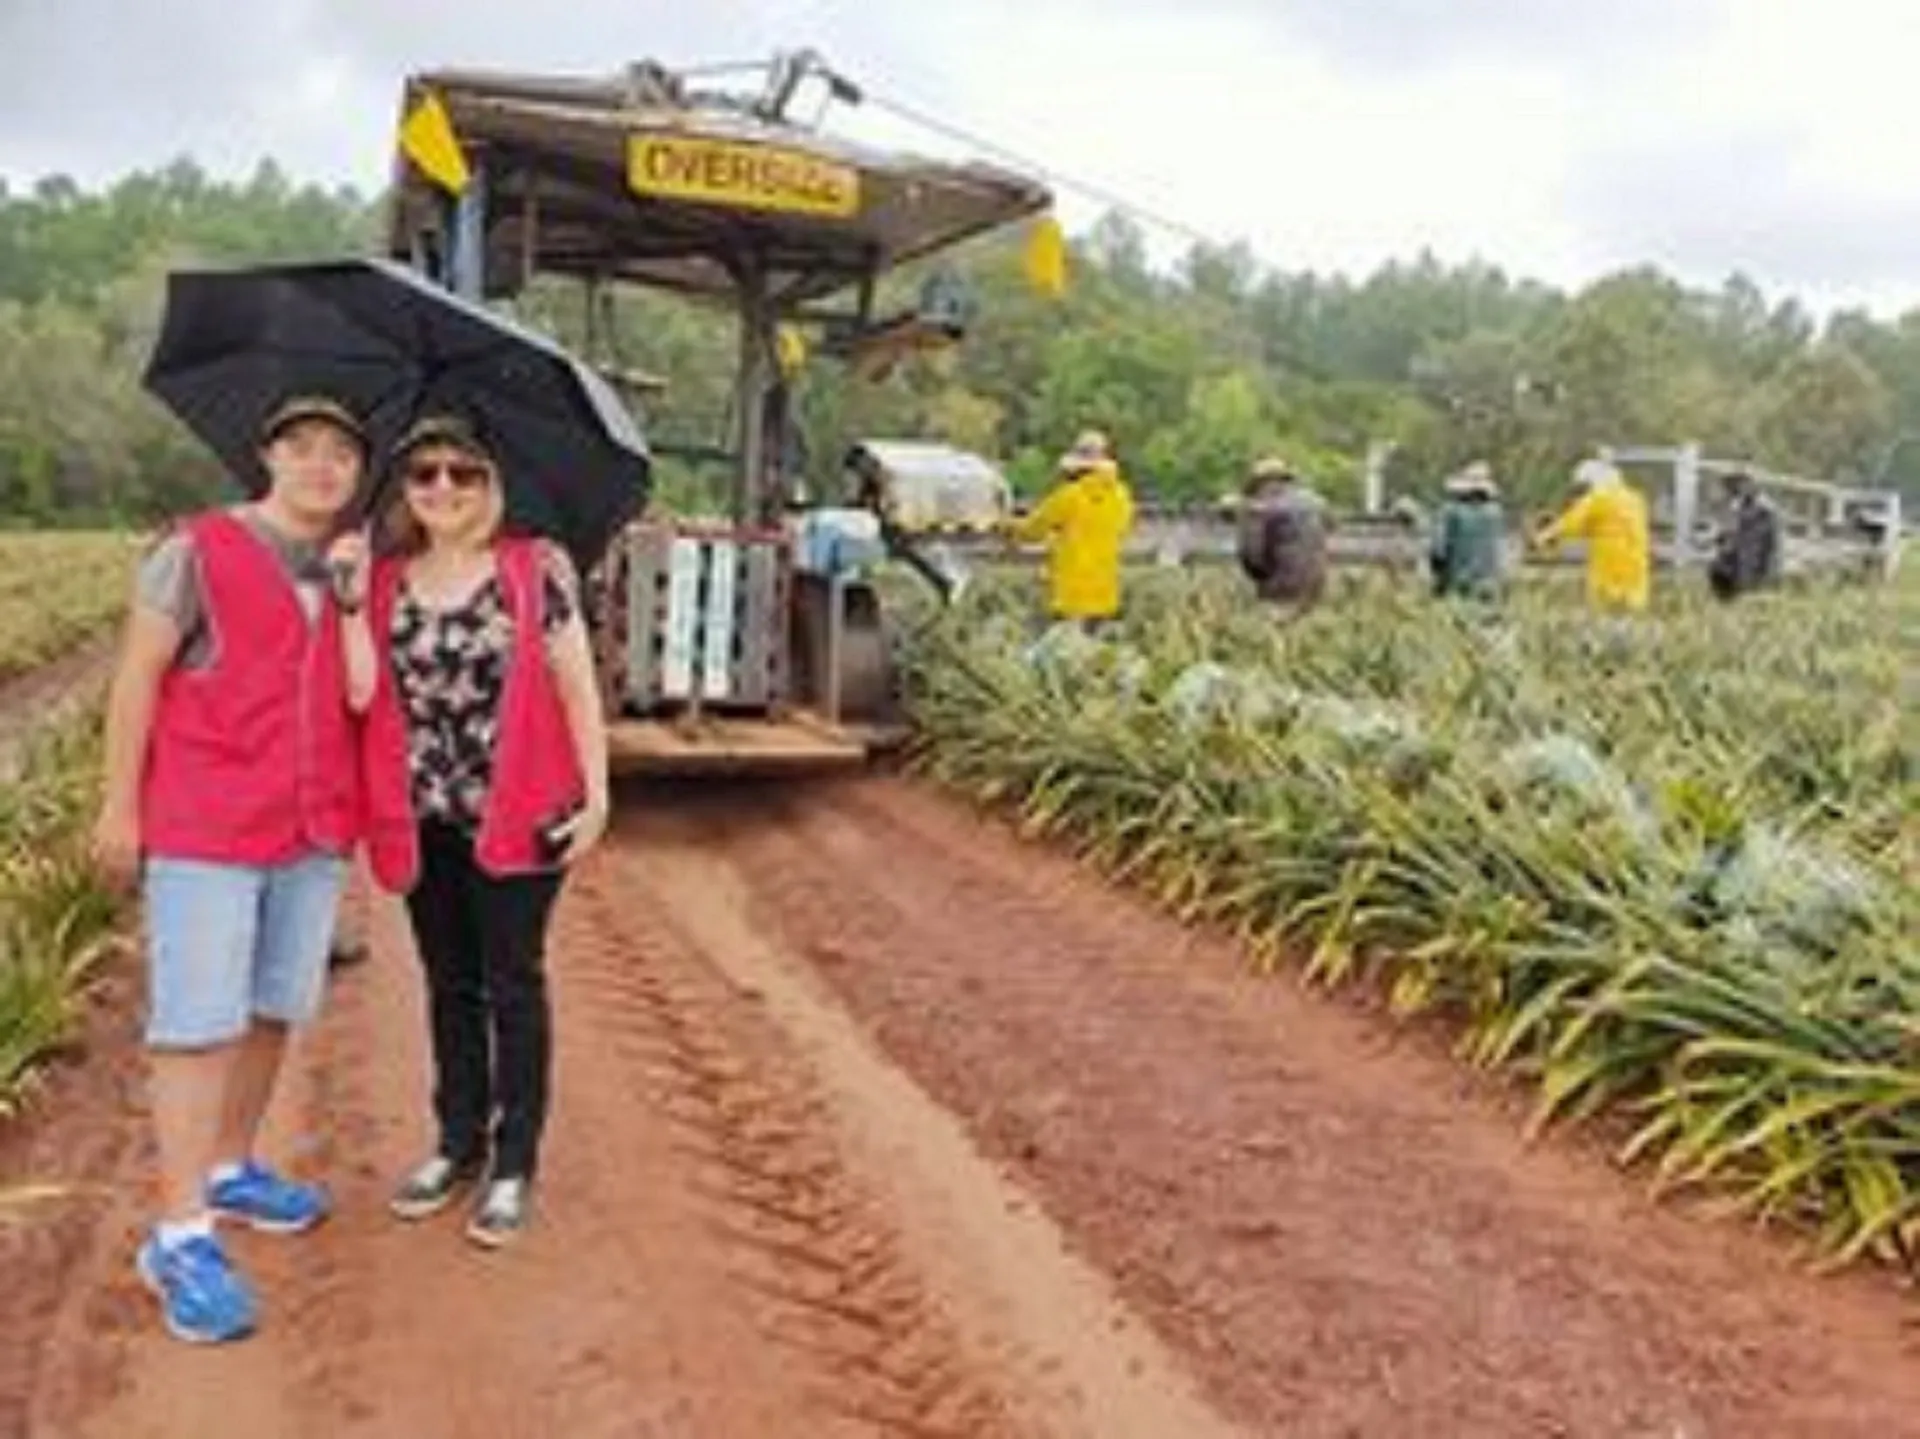 Image shows two guests in the middle of a pineapple farm, with tractor and farmers harvesting .